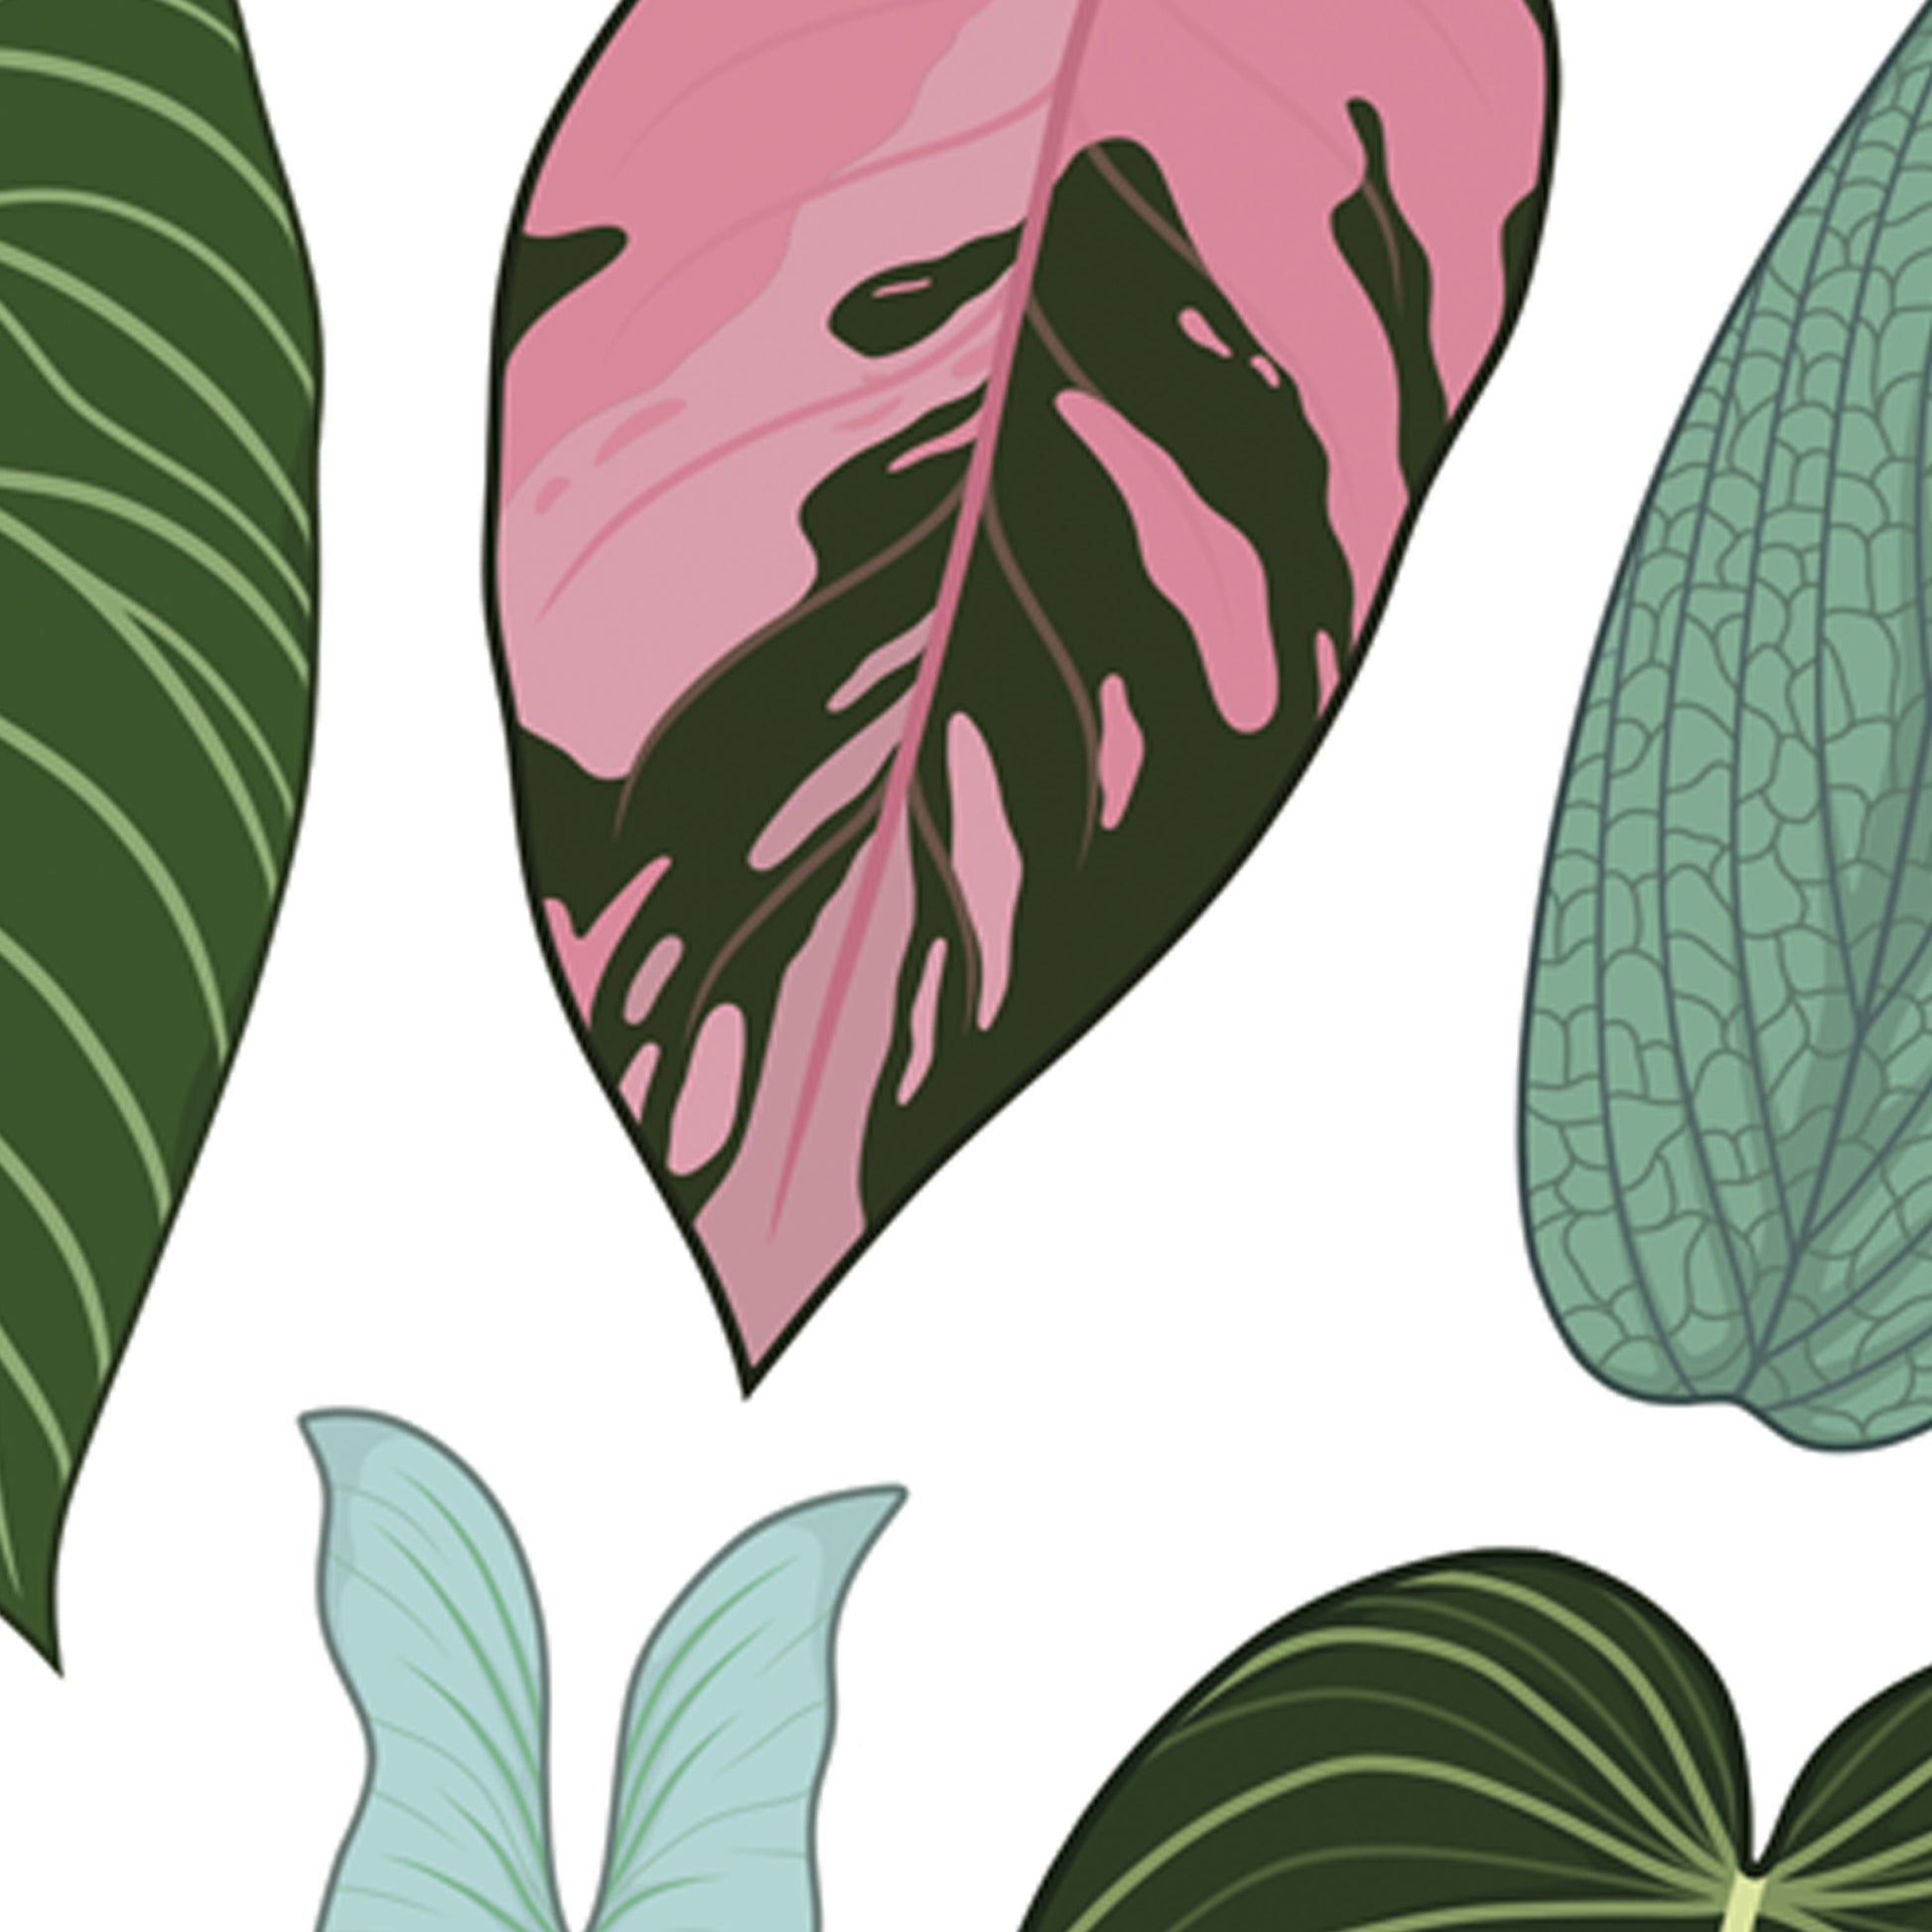 A4 illustrated philodendron poster digitally illustrated philodendron foliage houseplant art print pink princess